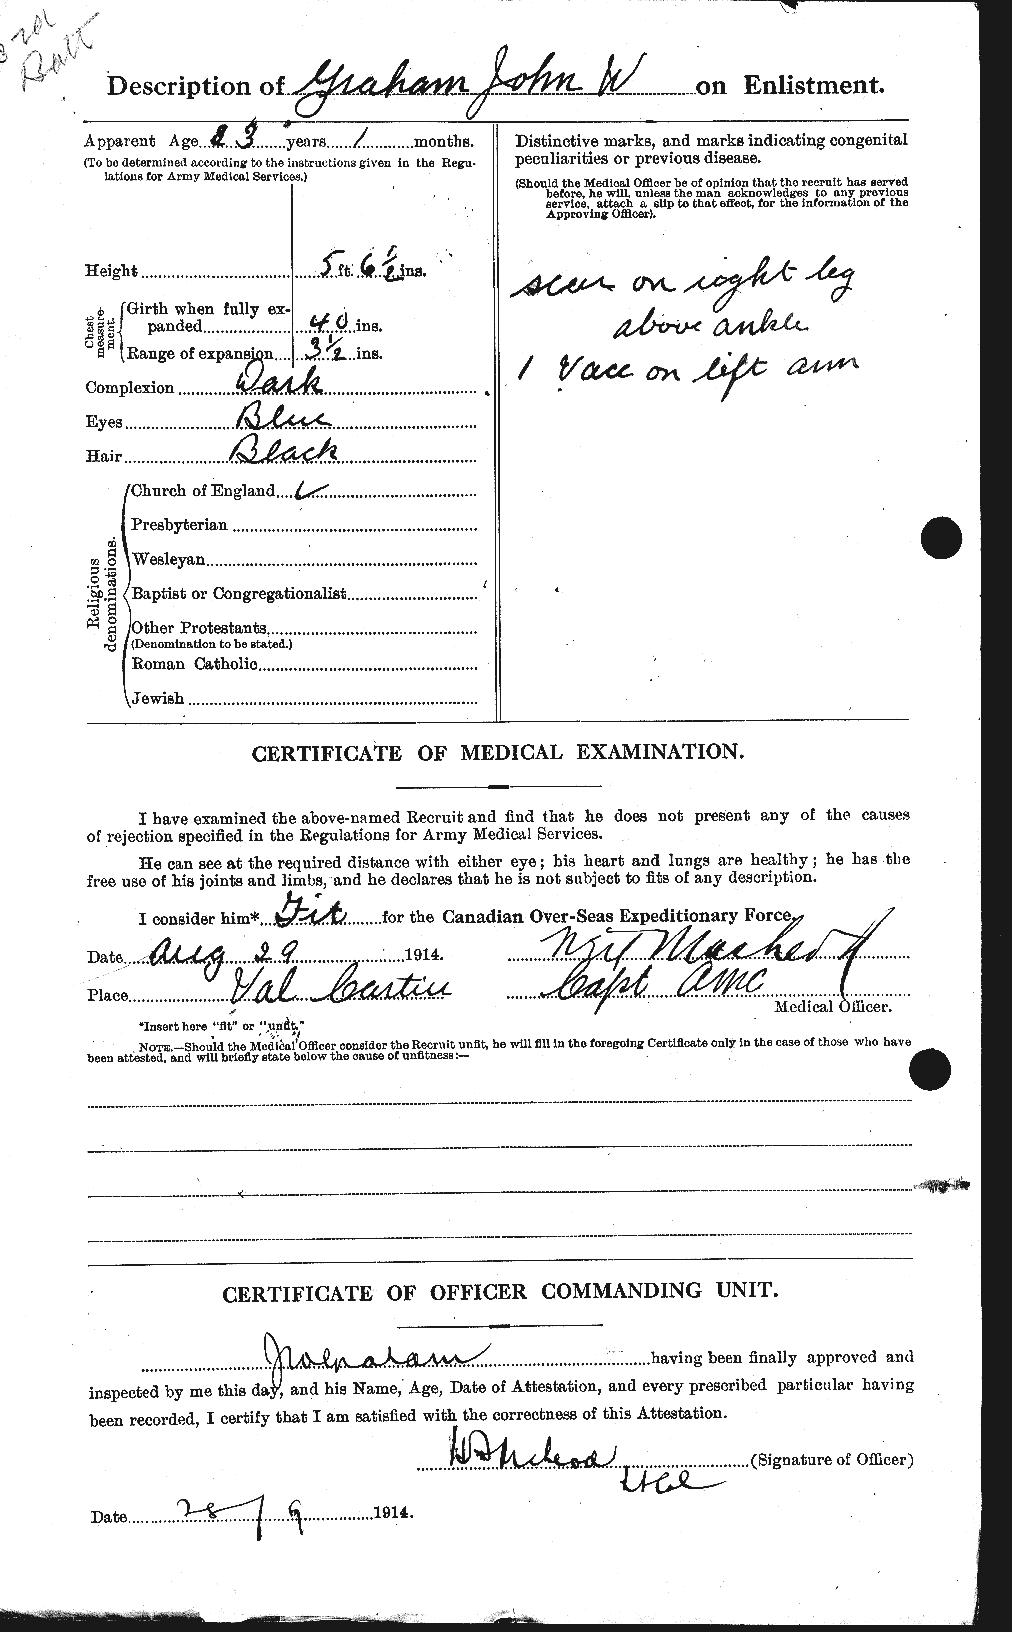 Personnel Records of the First World War - CEF 359221b